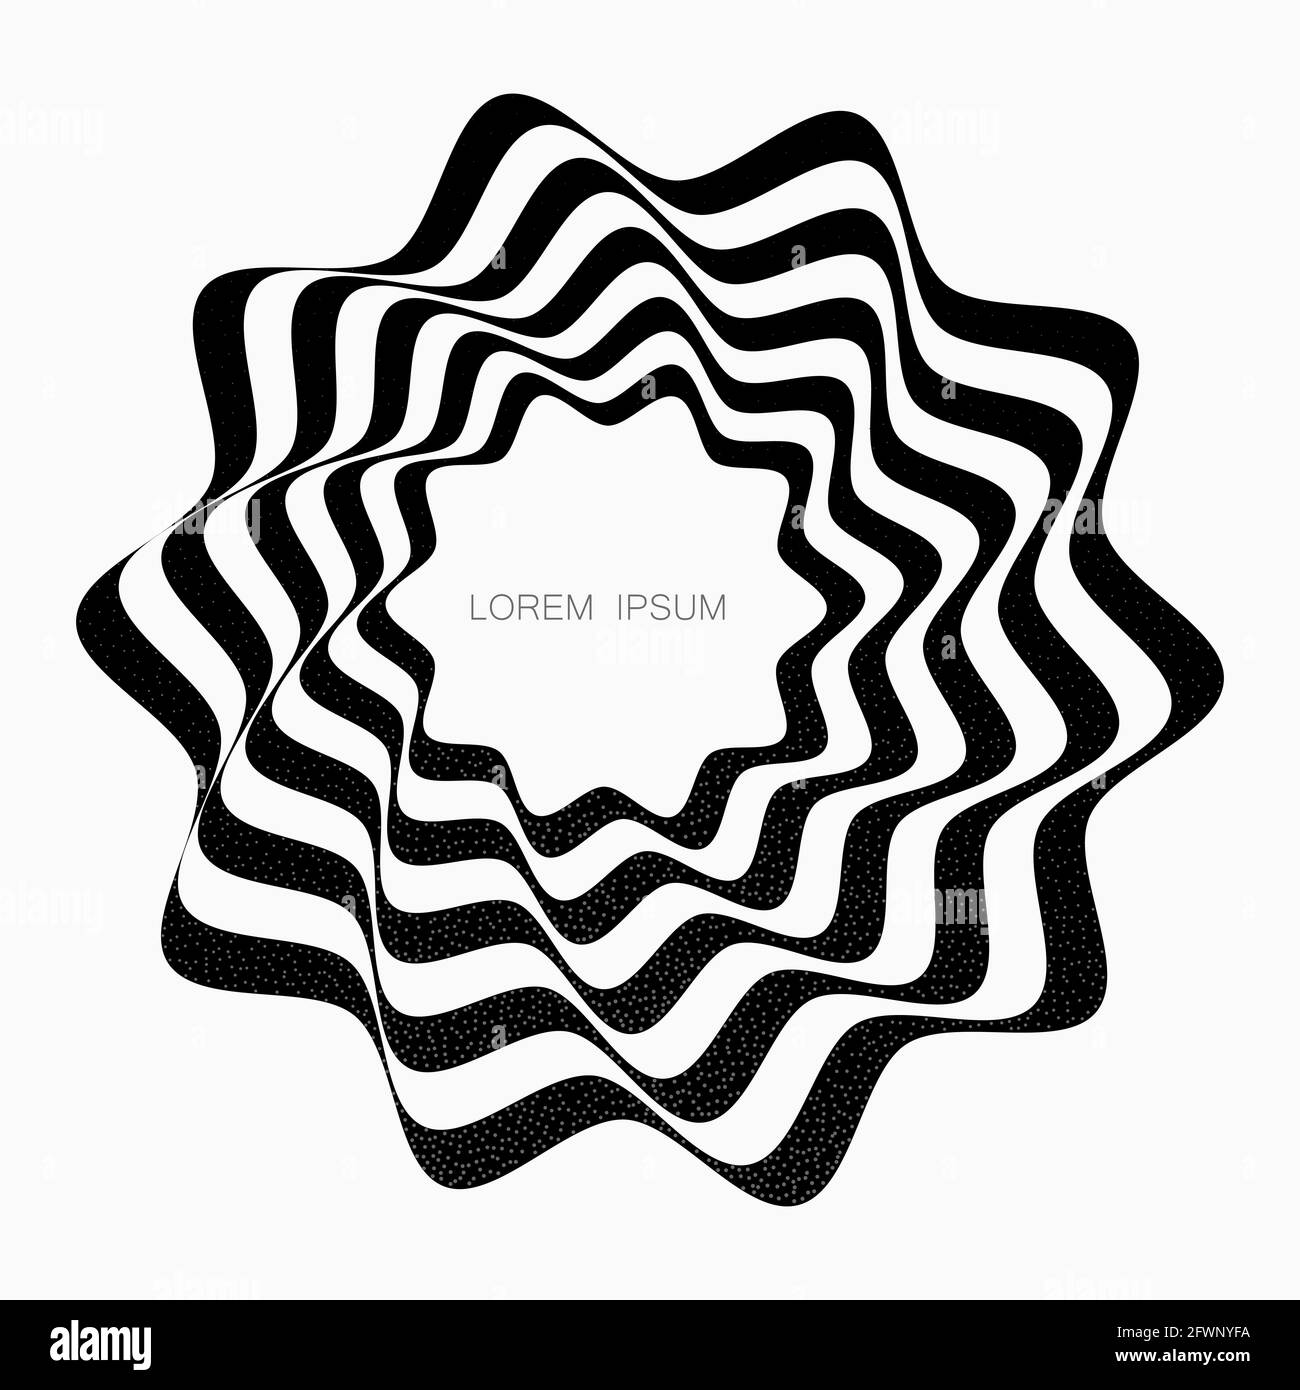 Black curved lines forming a circular, abstract organic shape. Vector element for design. Stock Vector